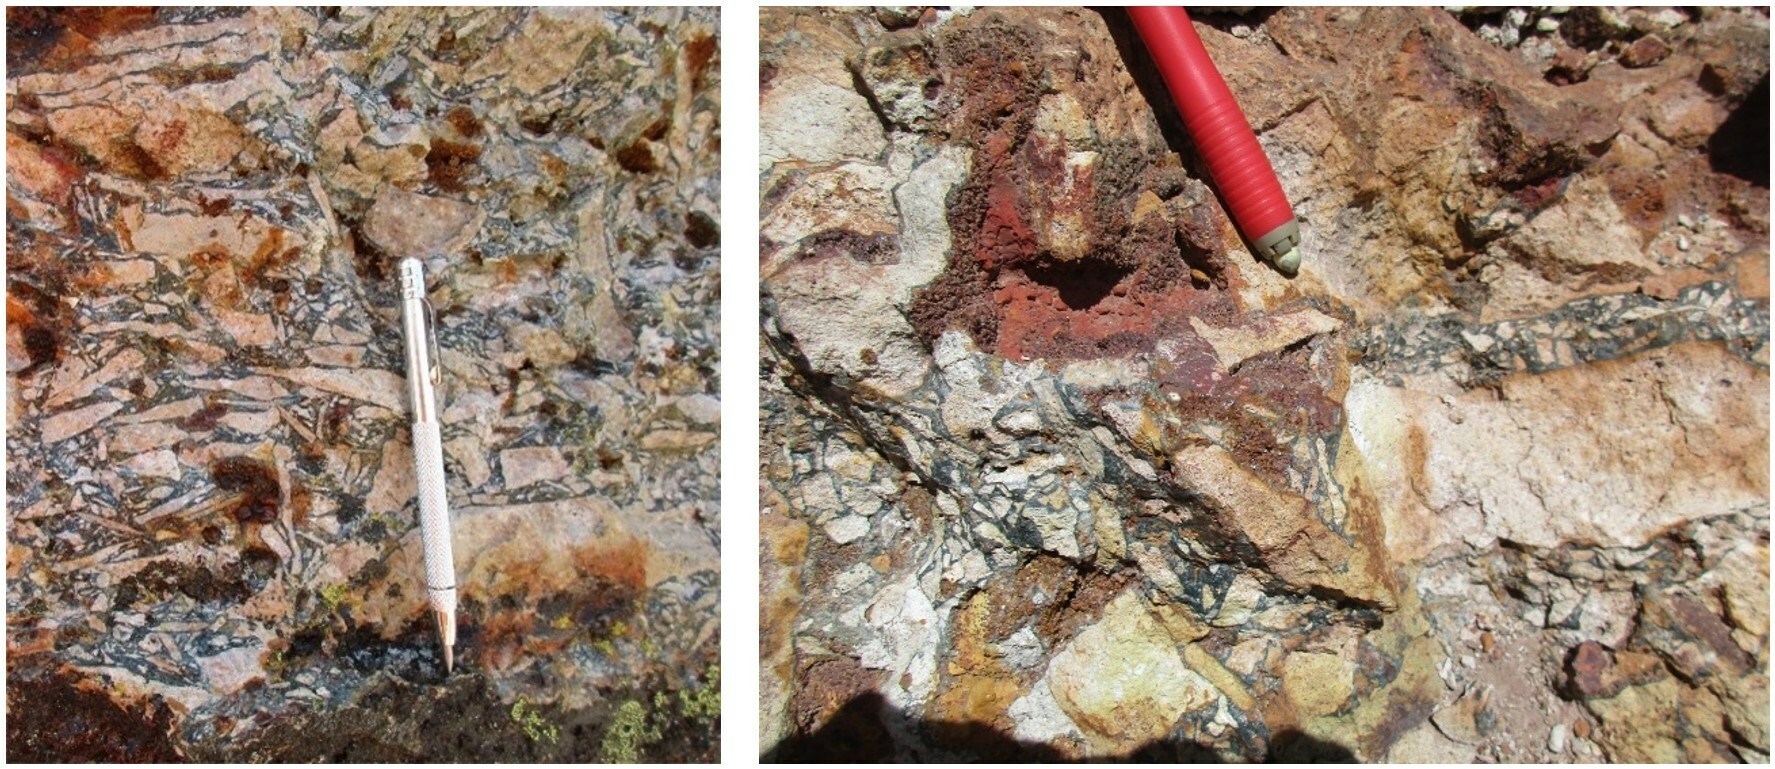 Figure 2: Photos taken from outcrops of the quartz-tourmaline breccia, Yahuarcocha sector. Sericite-altered andesite fragments are cemented by quartz, tourmaline, and limonite after pyrite. Note shingle-like appearance of many clasts, a typical texture in tourmaline breccias related to porphyry copper systems. (CNW Group/Silver Mountain Resources Inc.)